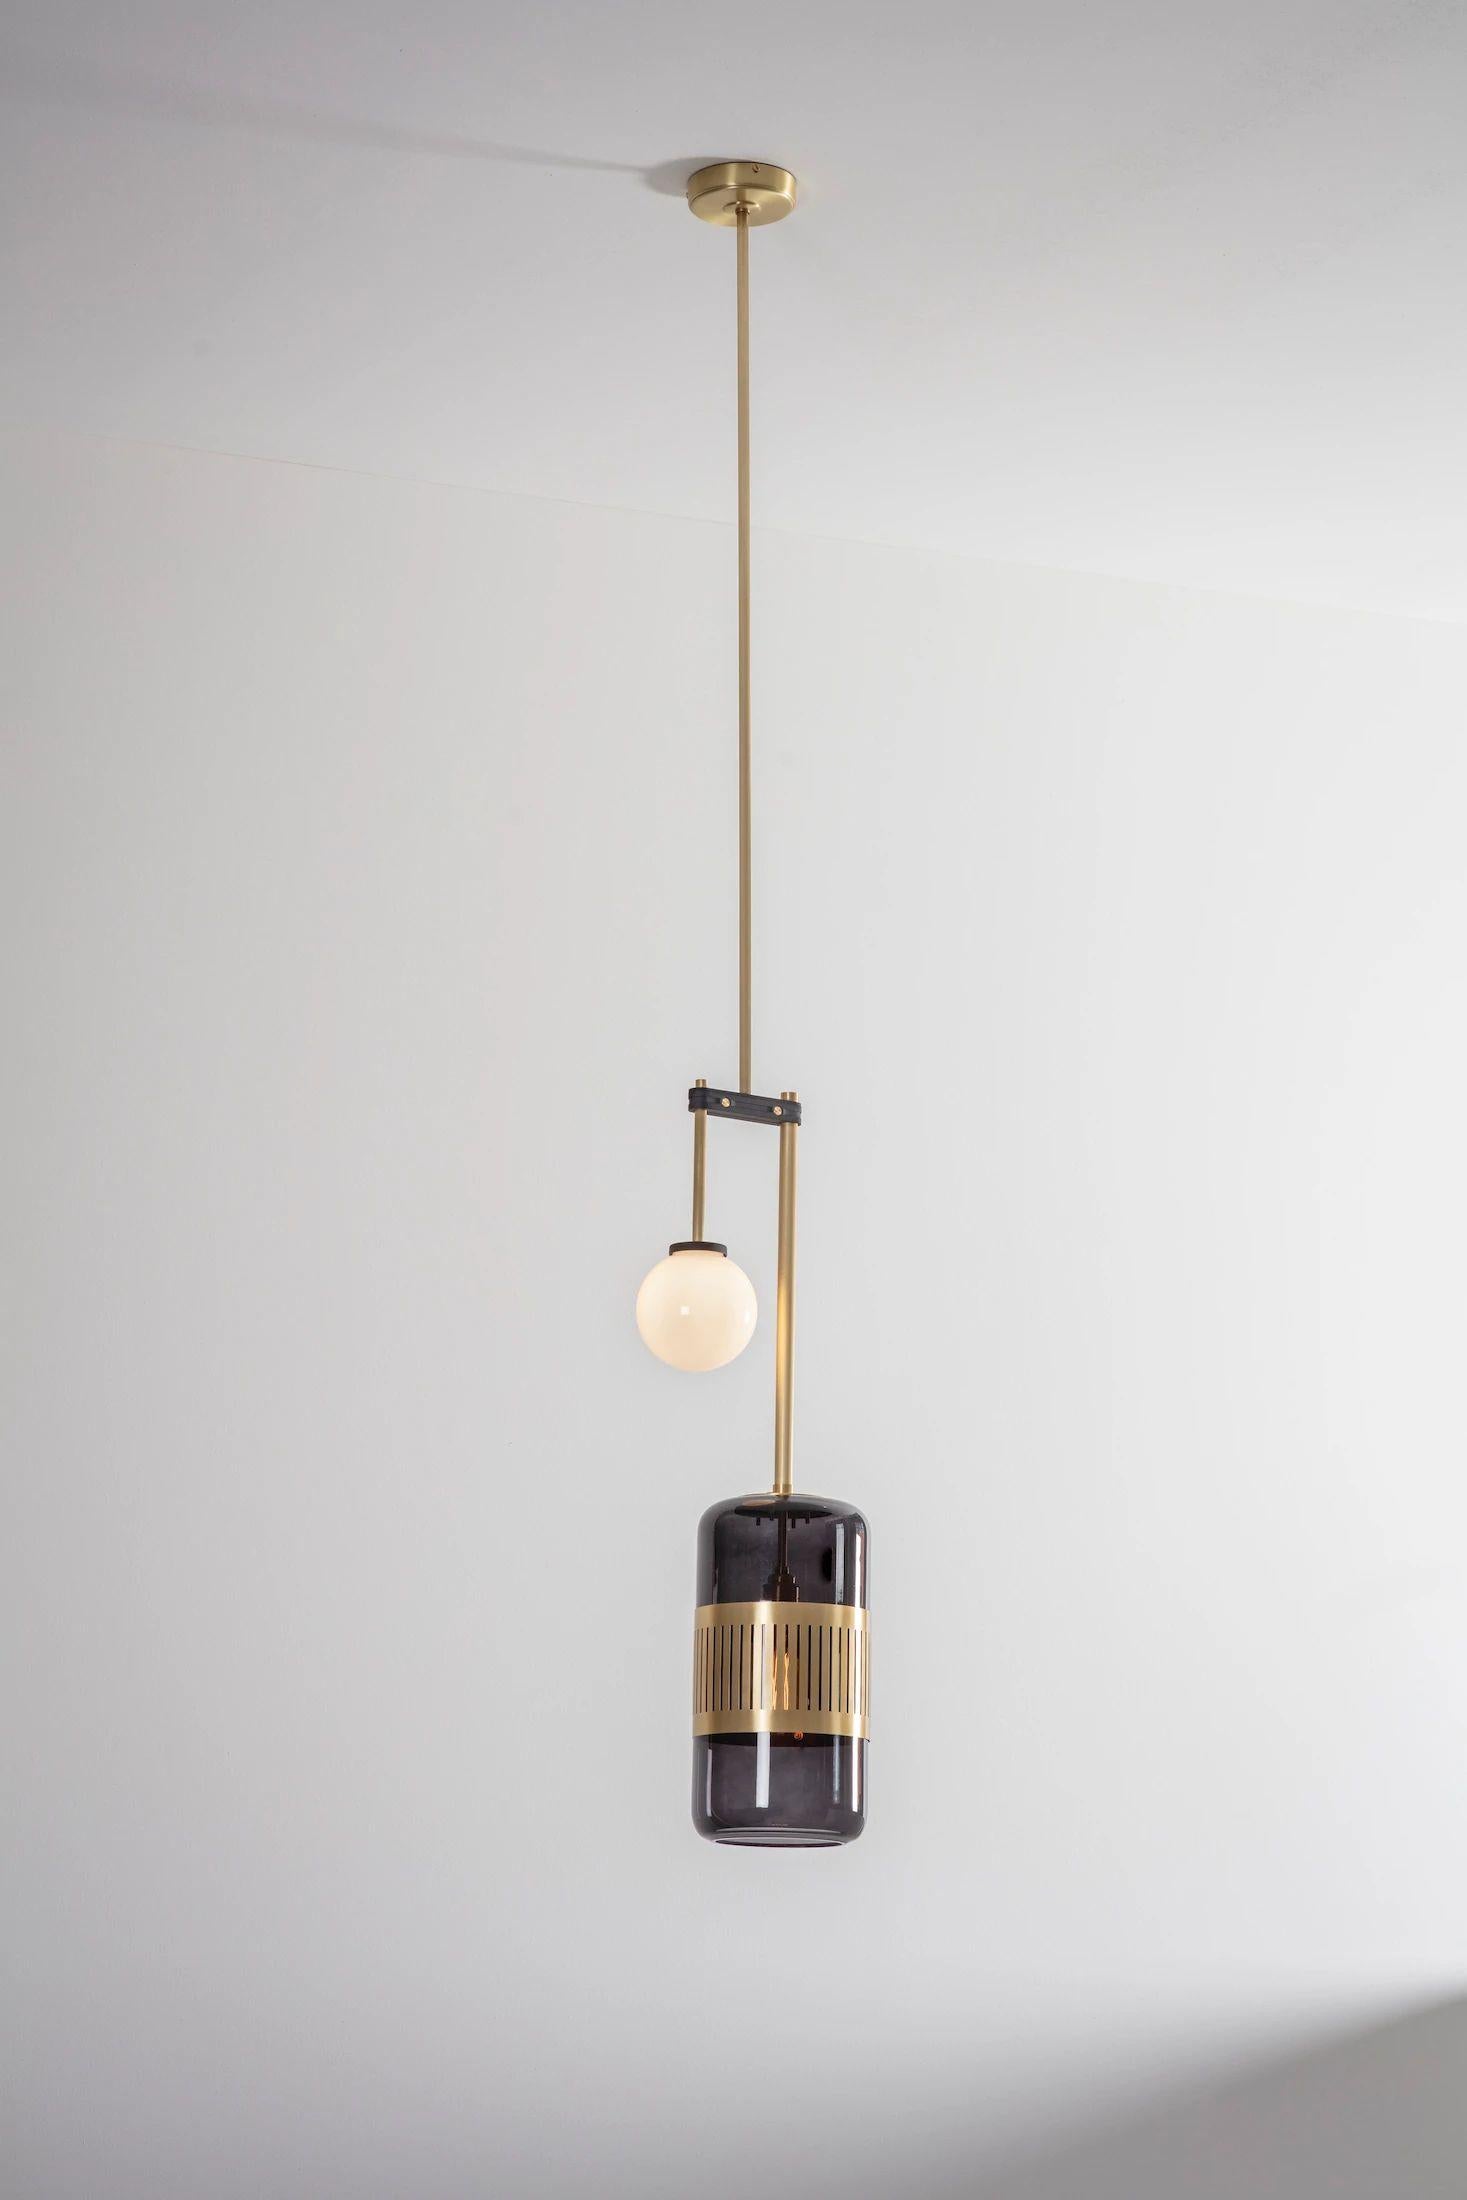 Smoked glass lizak drop pendant by Bert Frank.
Dimensions: D 78 x W 27 x H 78 cm
Materials: brass and glass.

Available finishes: brass, opal and blue.
All our lamps can be wired according to each country. If sold to the USA it will be wired